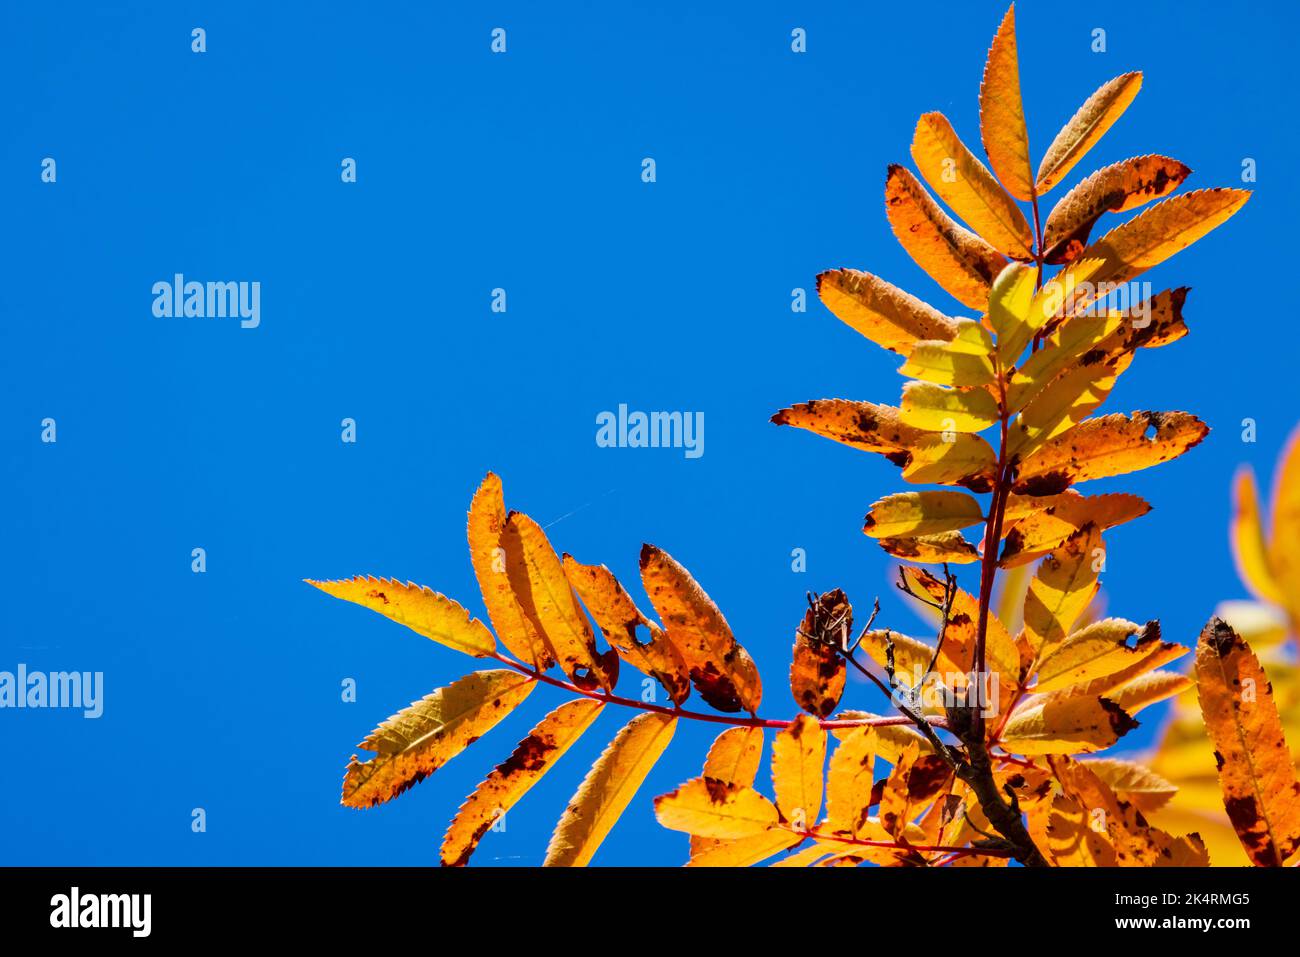 Yellow autumn leaves of a rowan tree are under clear blue sky background, close up photo with selective focus. Fall season natural photo Stock Photo